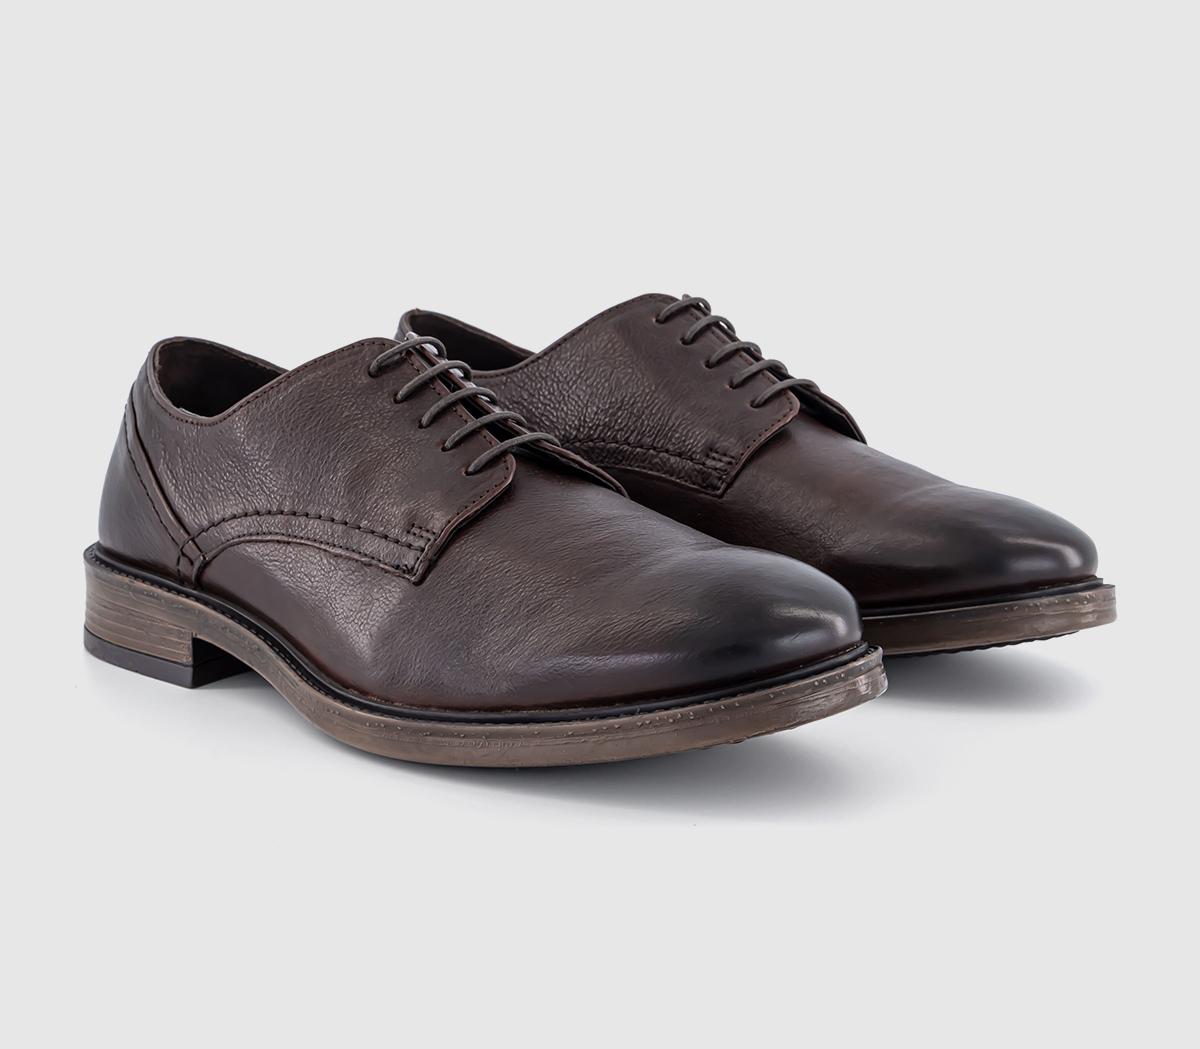 OFFICE Cadeleigh Casual Leather Derby Shoes Brown, 10